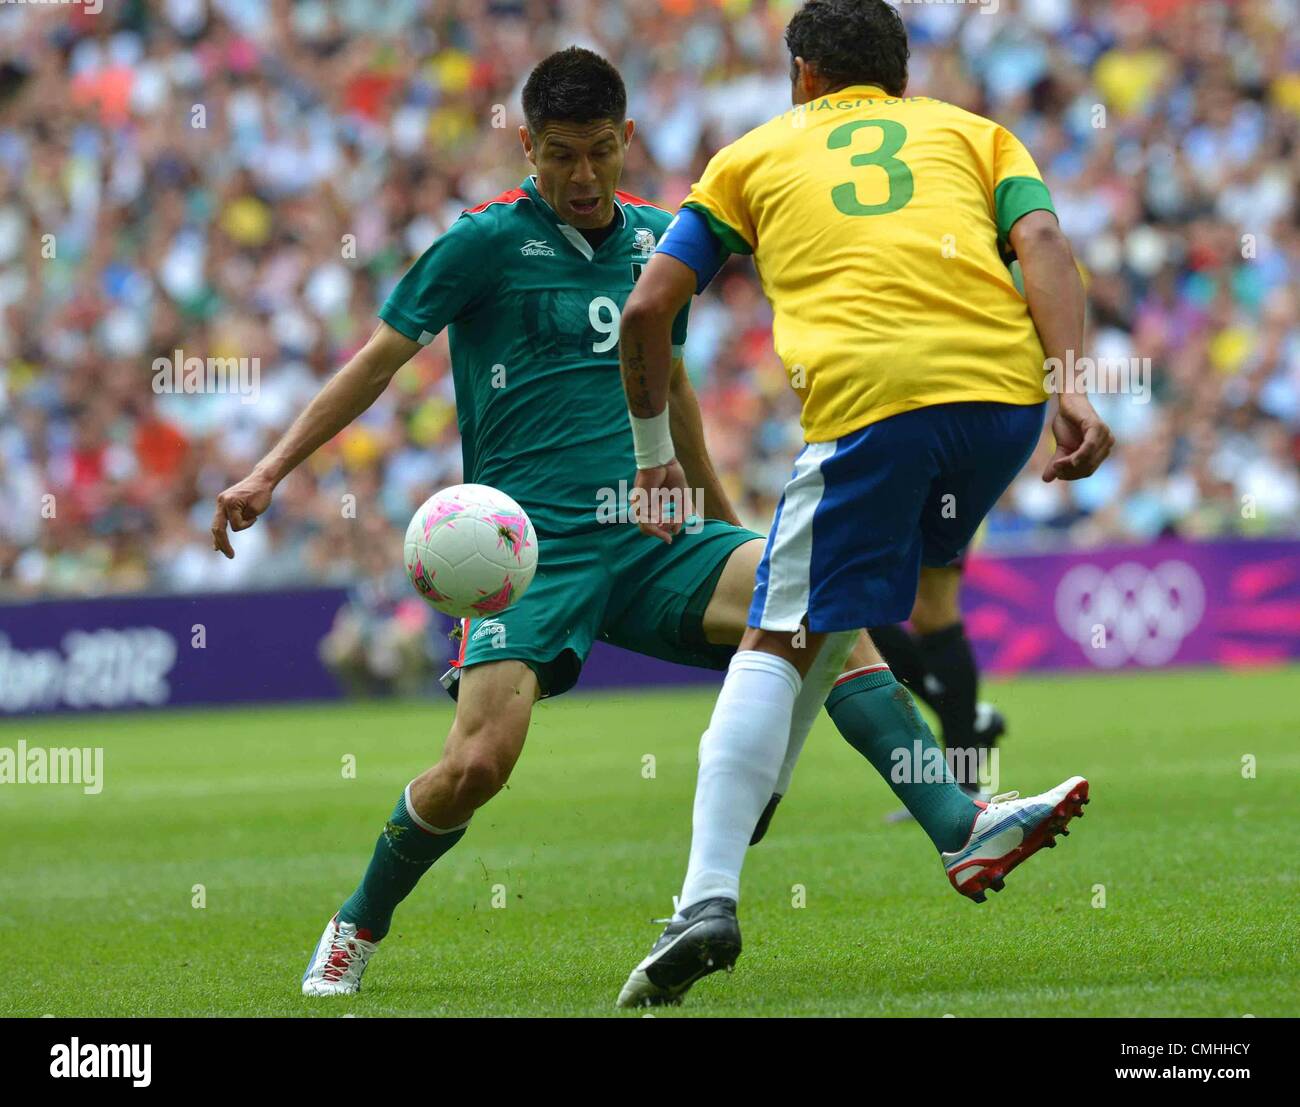 11.08.2012. Wembley Stadium, London, England. Oribe Peralta of Mexico challenges  for The Ball during Mens Football Gold Medal Match between Brazil and Mexico  London 2012 Olympic Games  Mexico Won The Match 2 1 and Won the Gold Medal Stock Photo